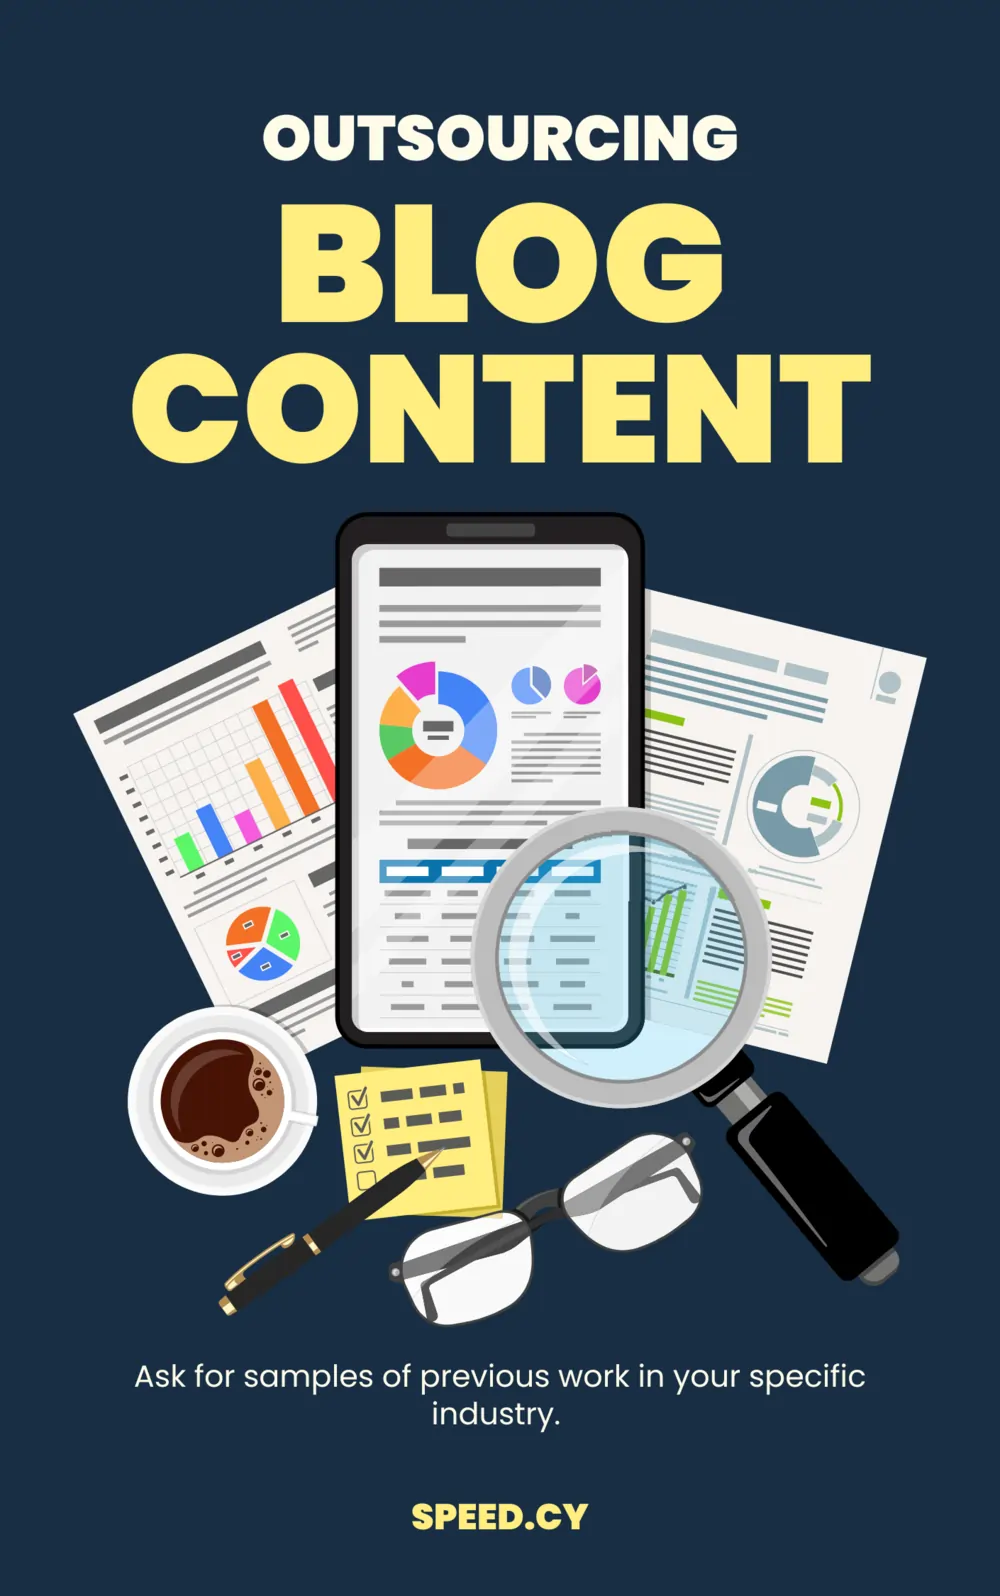 Evaluating content before hiring the content provider